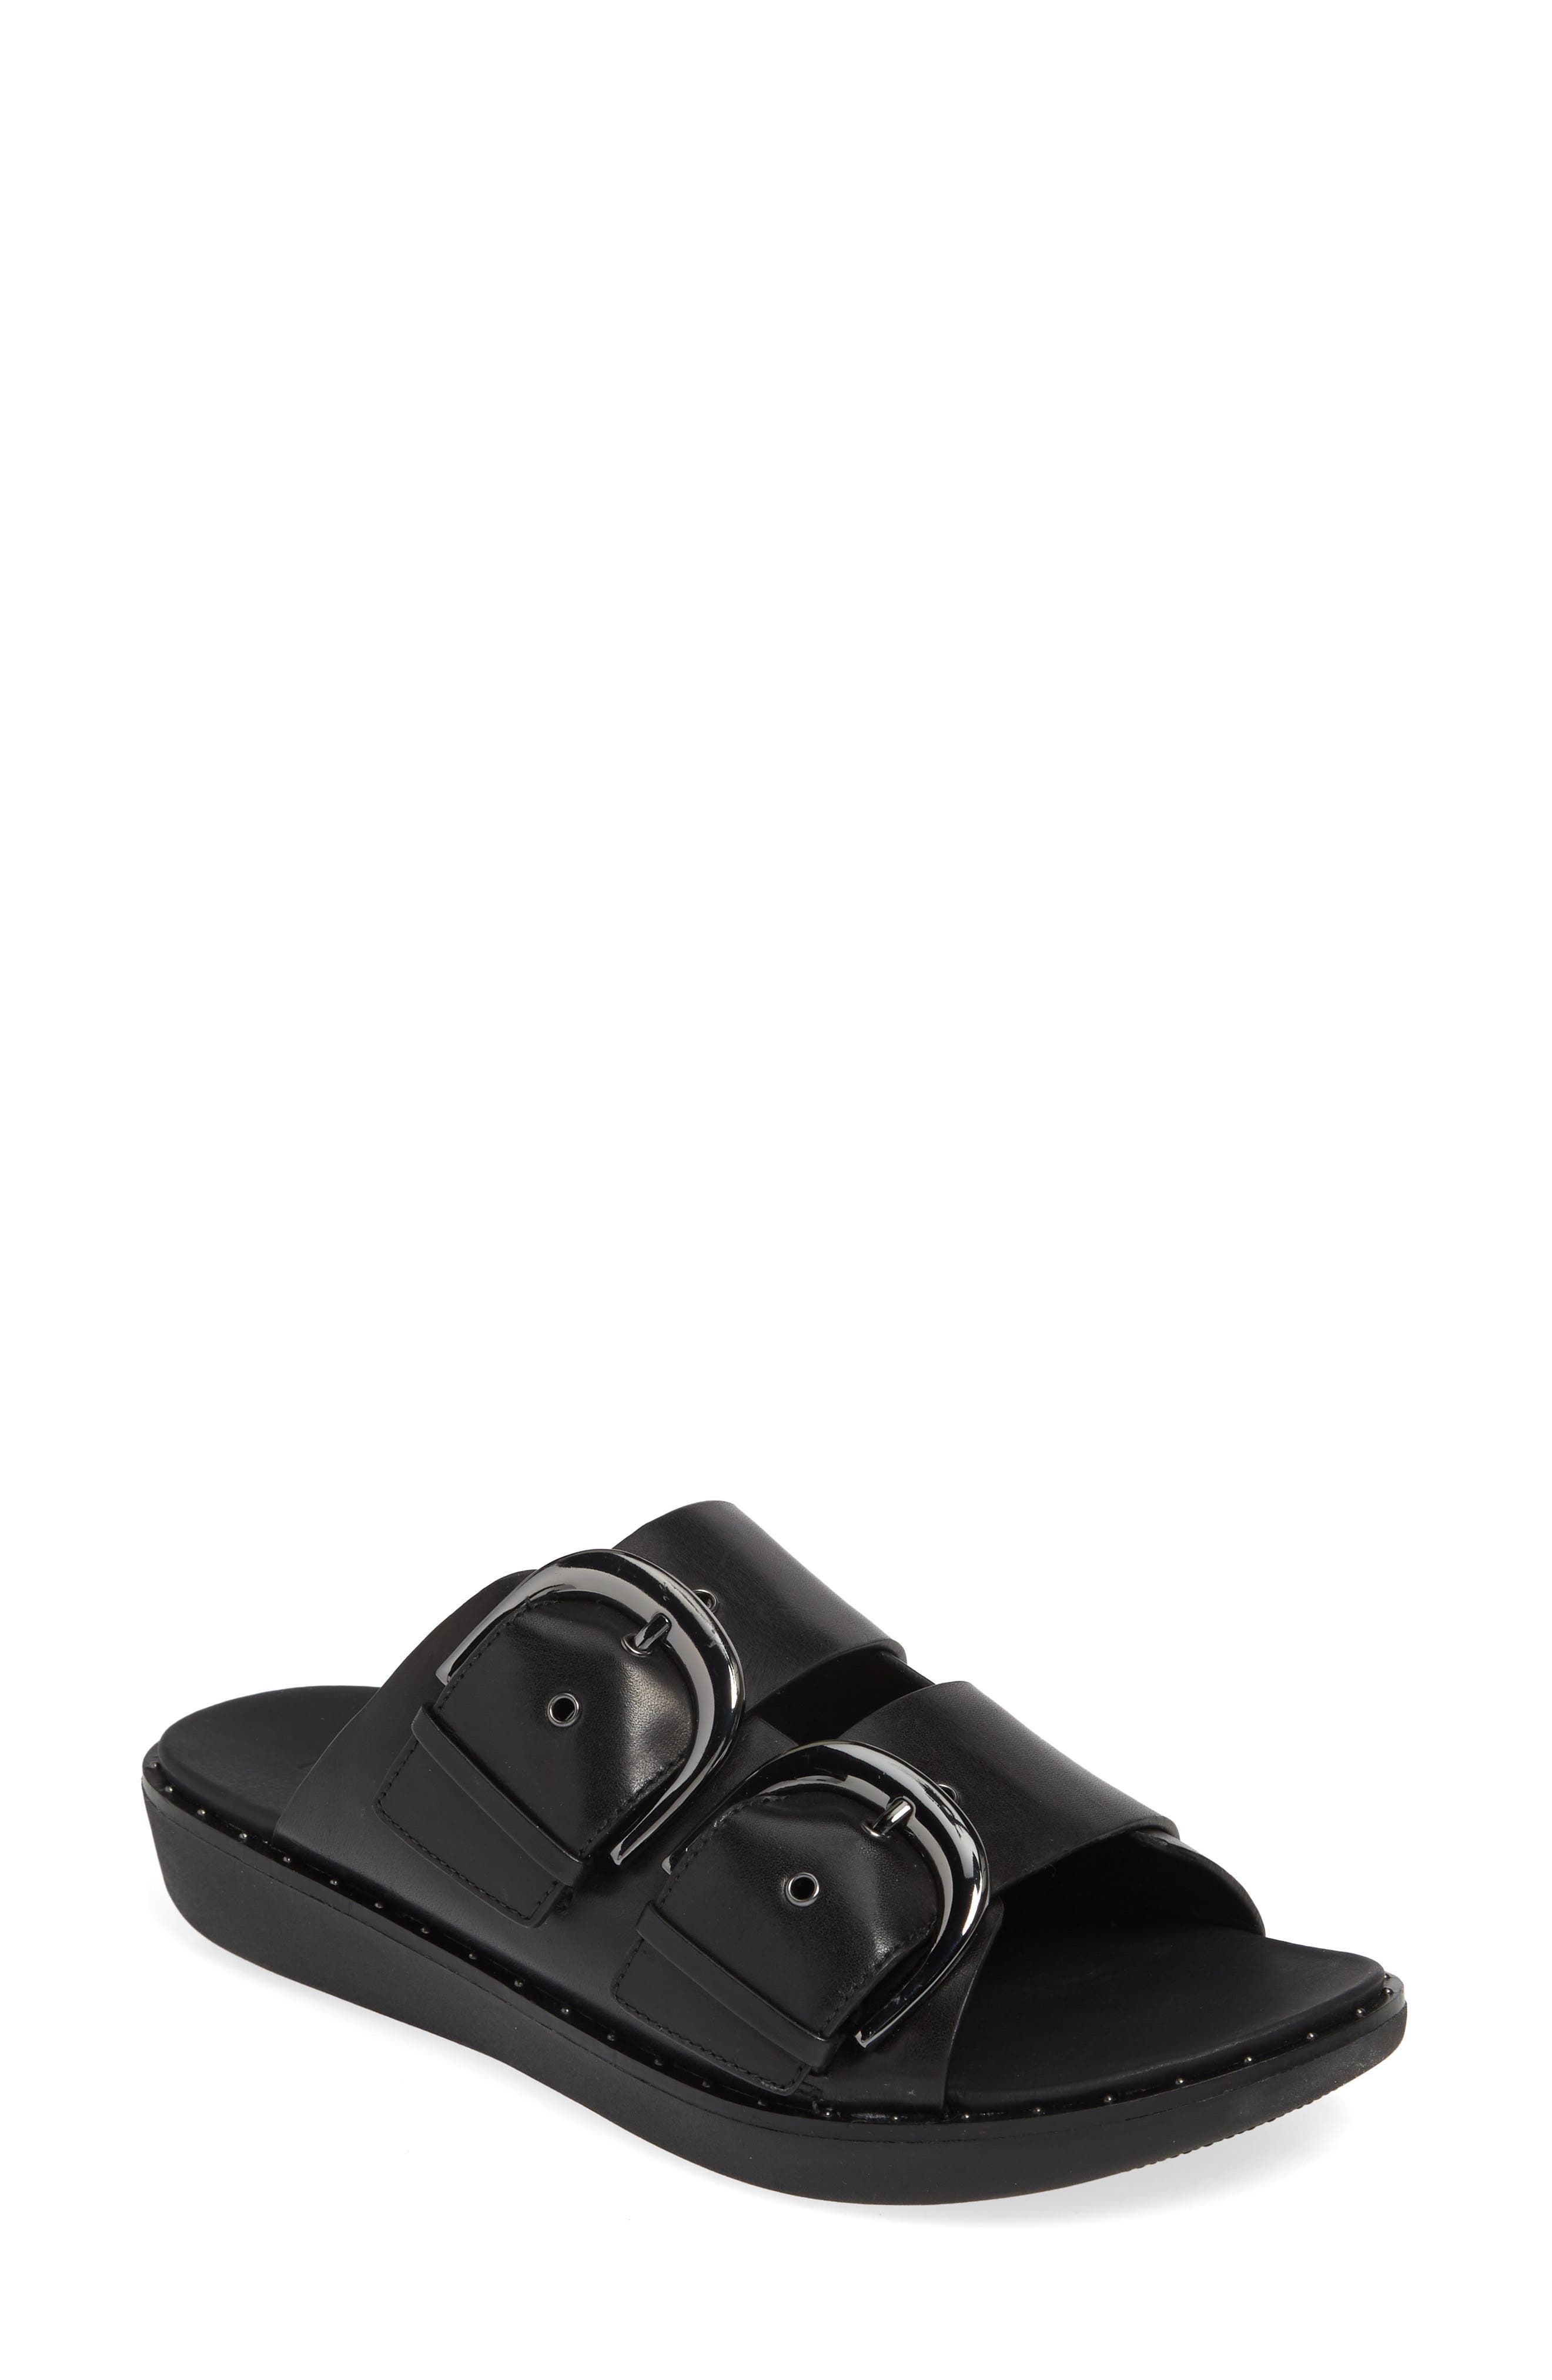 fitflop buckle sandal